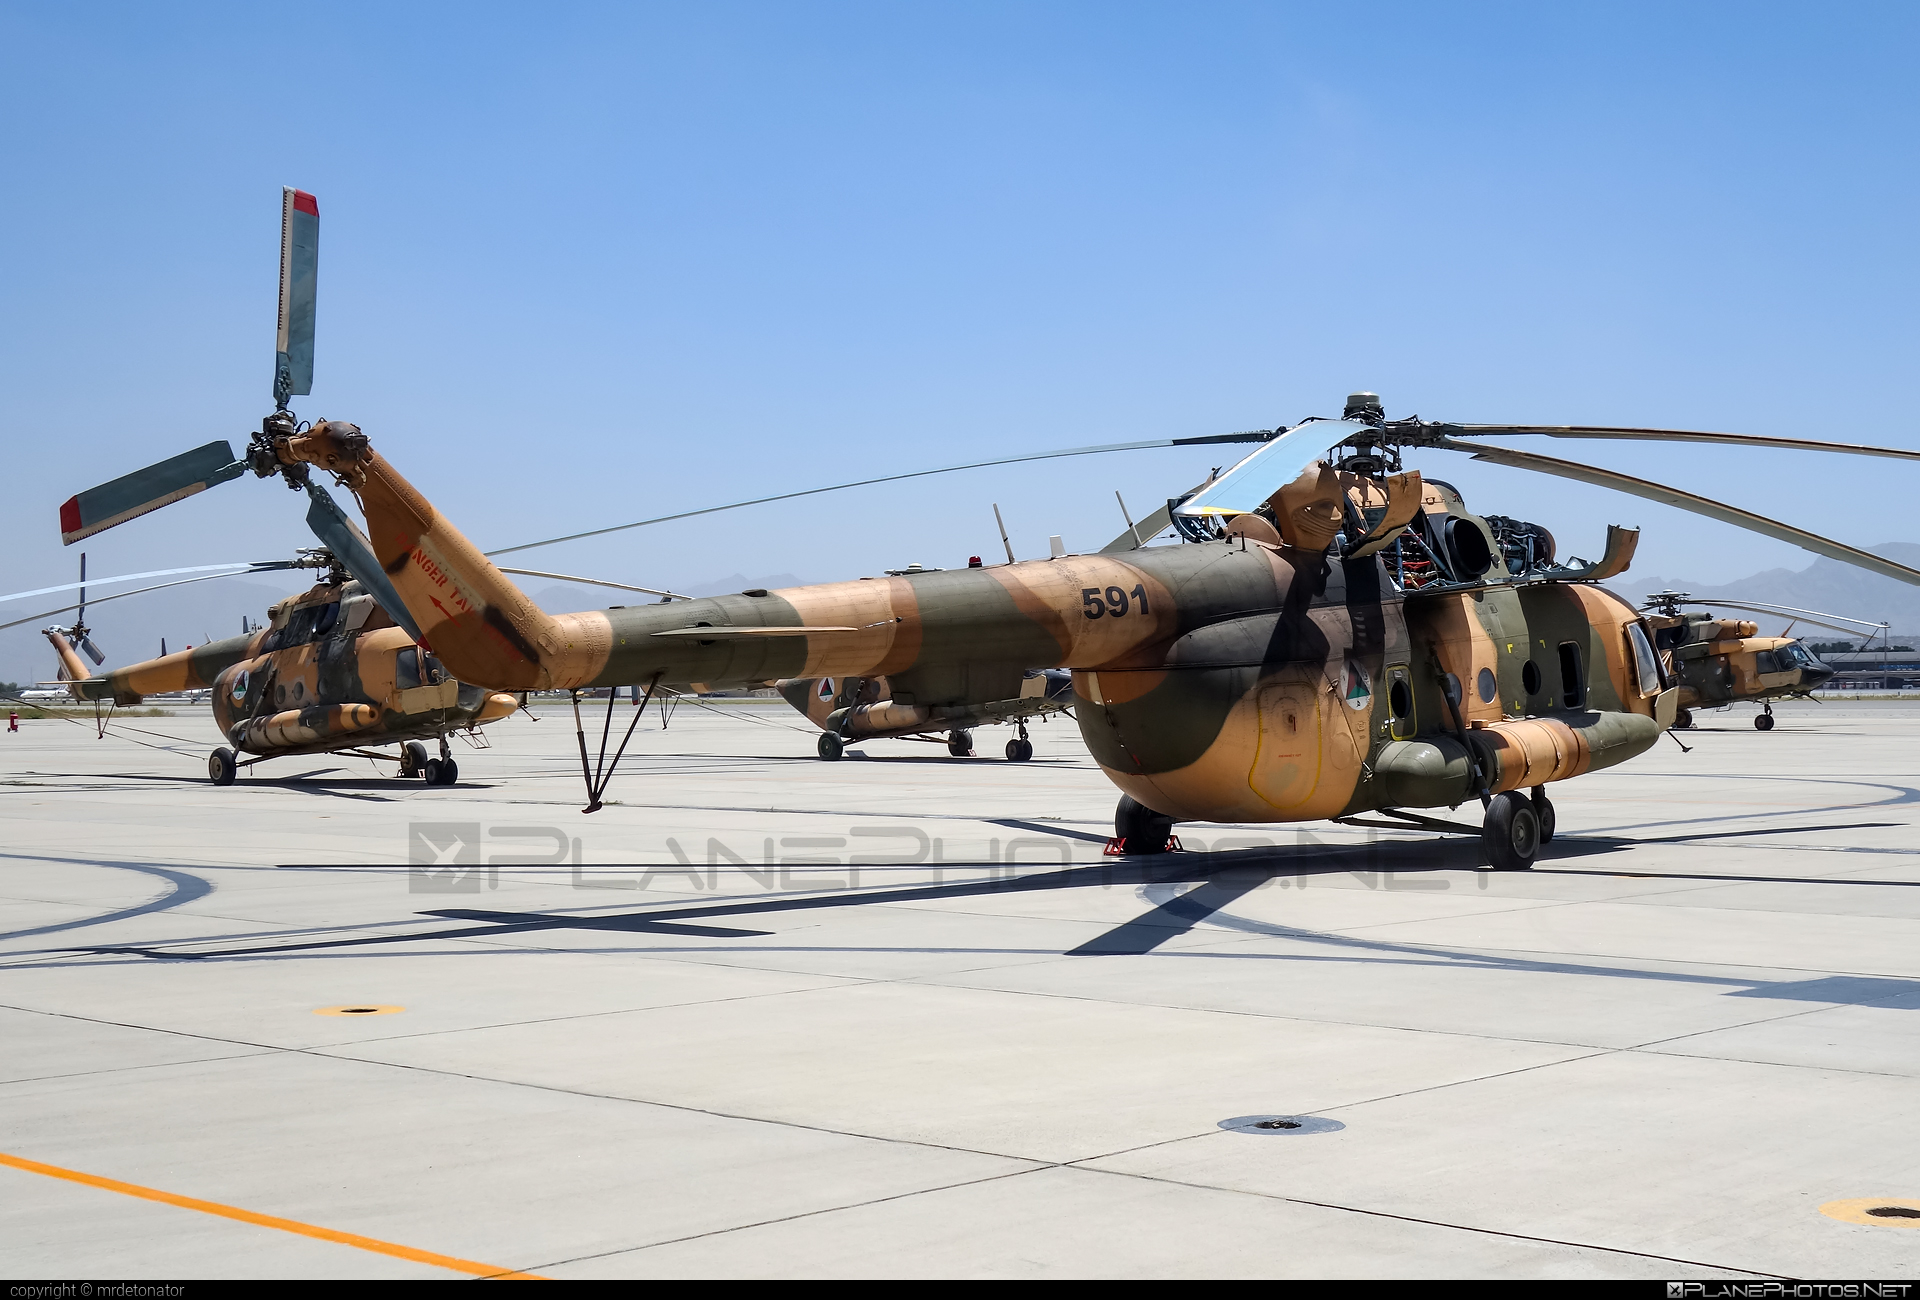 Mil Mi-17-1V - 591 operated by Afghan Air Force #afghanairforce #mi17 #mi171v #mil #milMi17 #milMi171v #milhelicopters